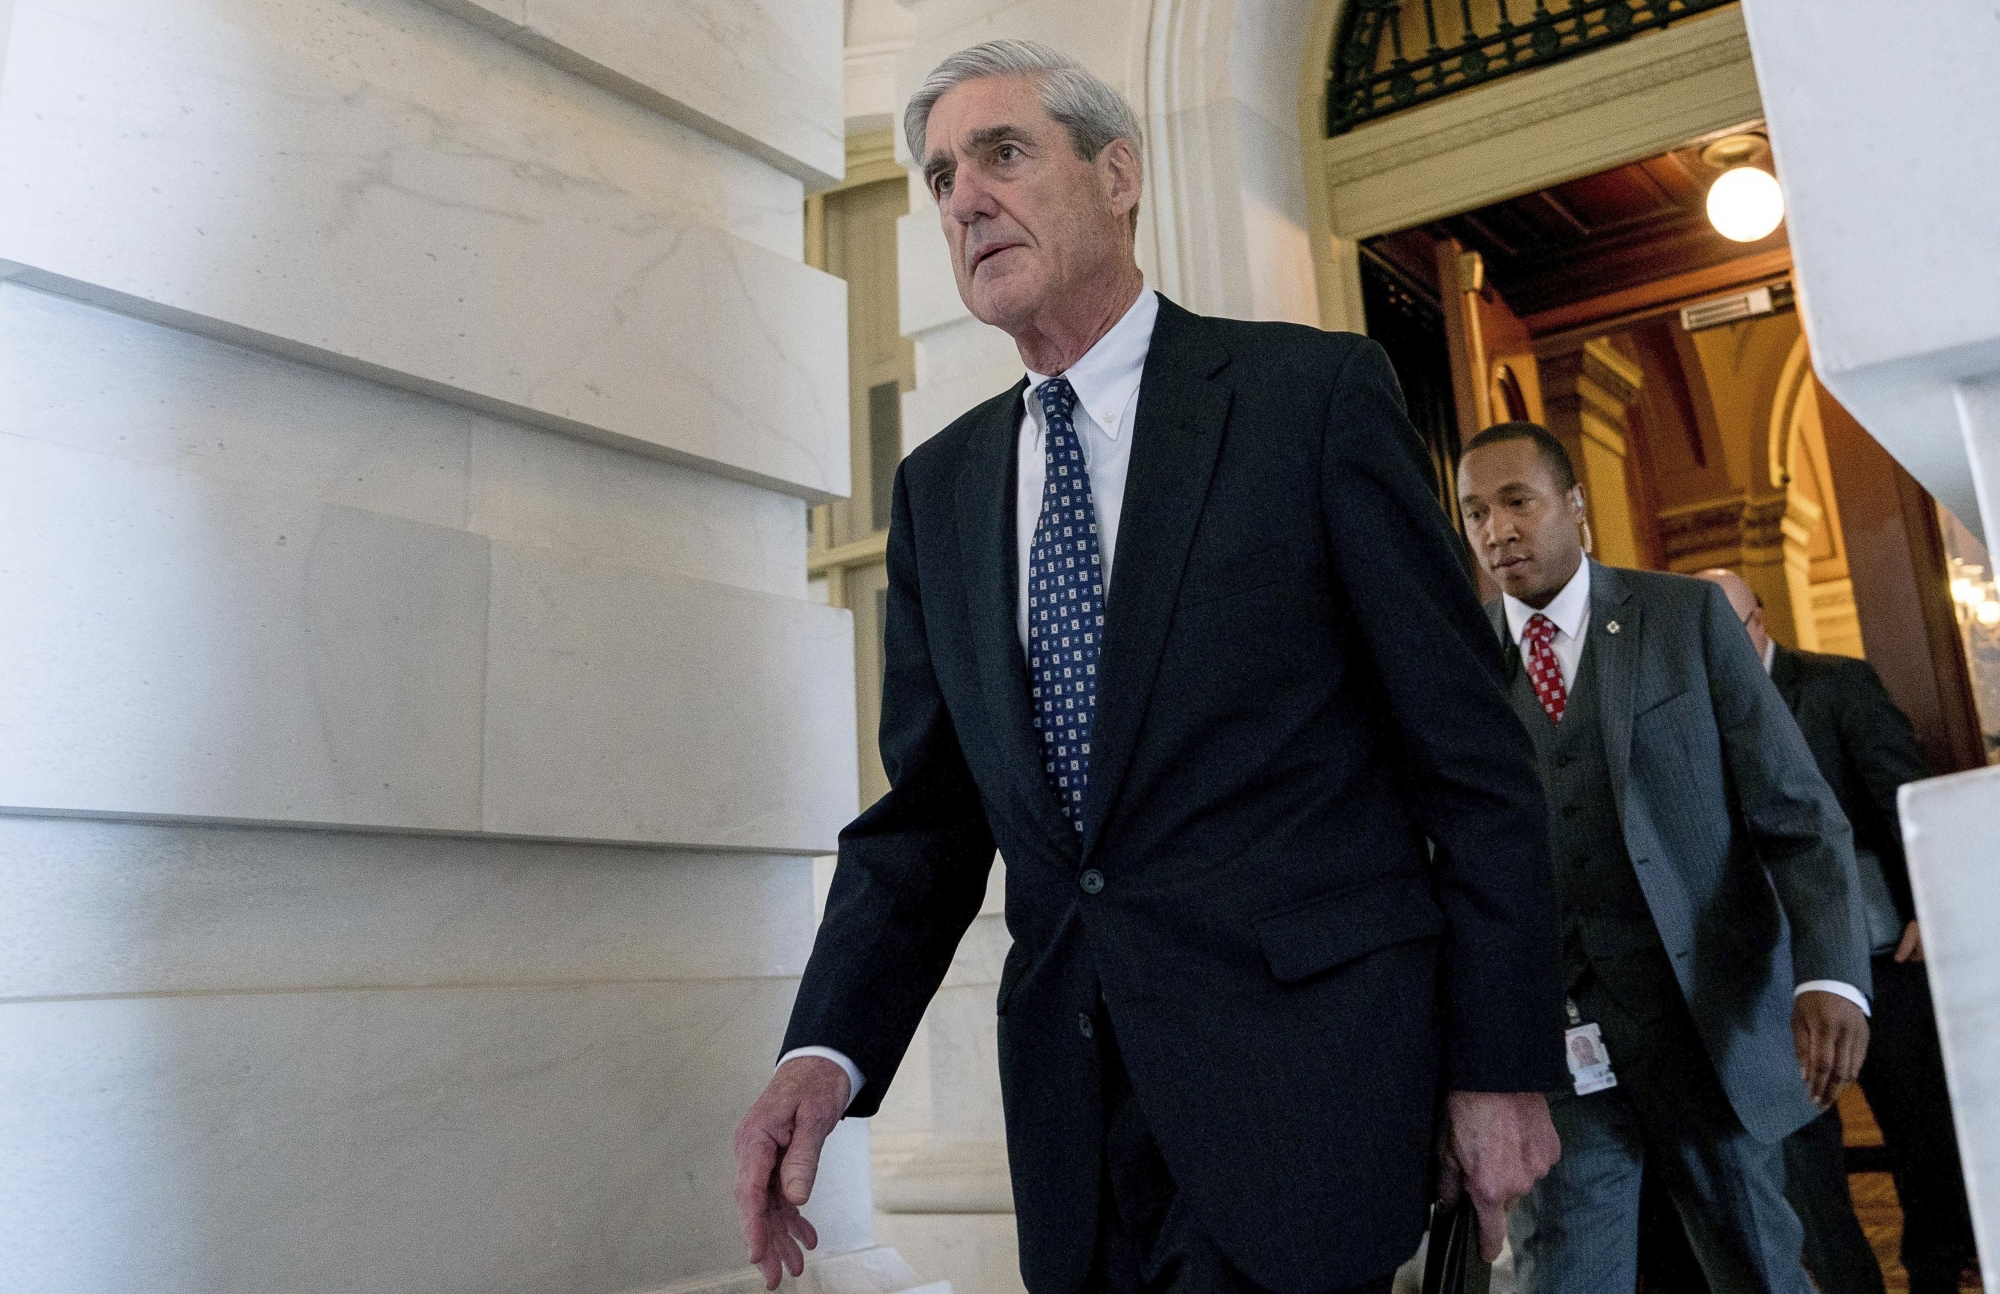 FILE - In this June 21, 2017, file photo, former FBI Director Robert Mueller, the special counsel probing Russian interference in the 2016 election, departs Capitol Hill in Washington. President Donald Trump's transition organization is arguing that a government agency improperly turned over a cache of emails to Mueller as part of his investigation into contacts between Trump associates and Russia. The complaint by the transition team is the latest attempt to undermine Mueller's investigation in the public sphere. (AP Photo/Andrew Harnik, File) TRUMP RUSSIA PROBE EMAILS Q&A